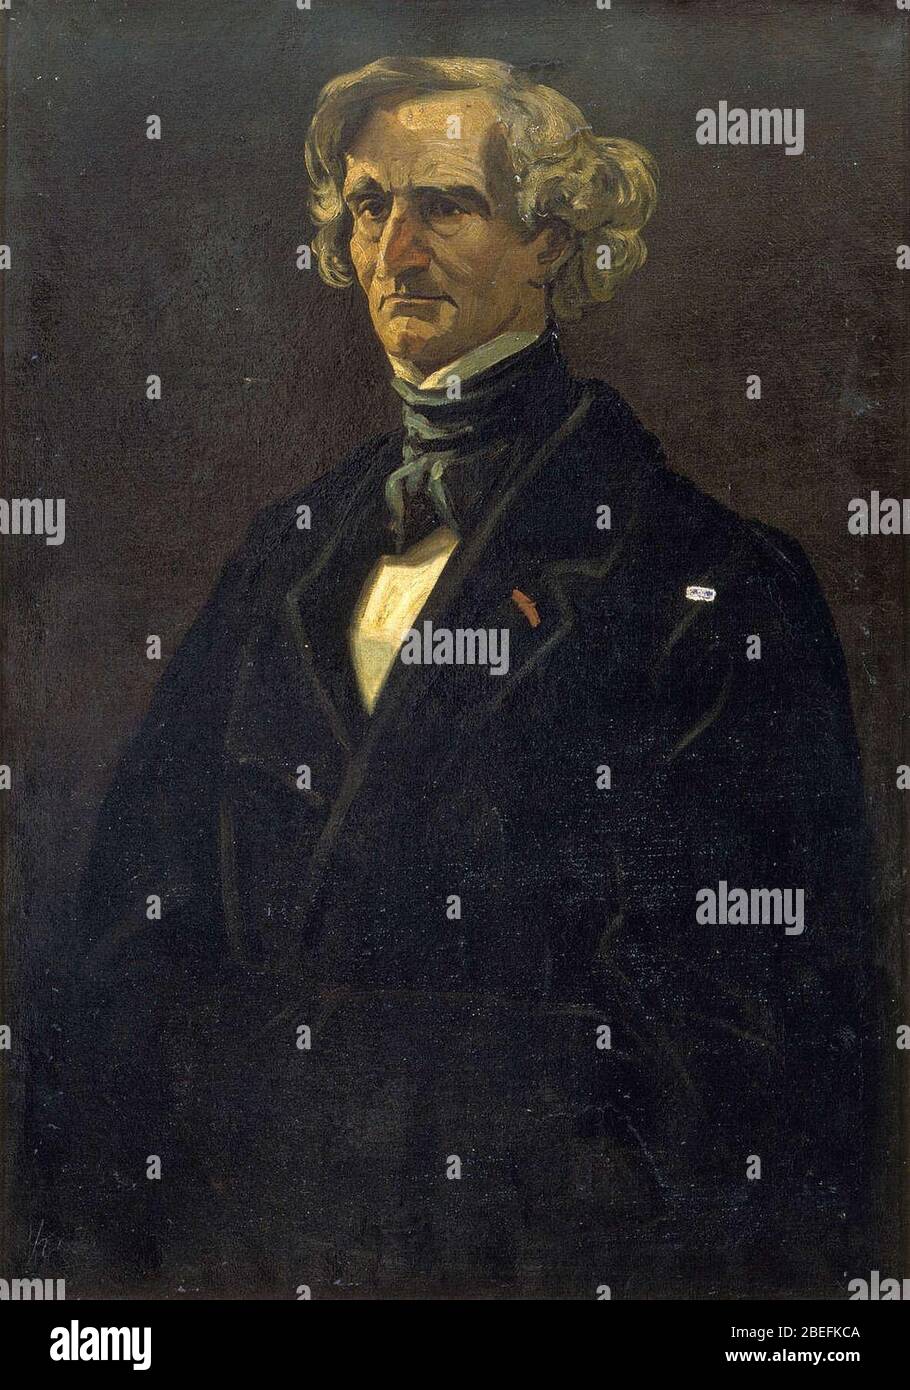 Hector Berlioz by Andre Gill. Stock Photo